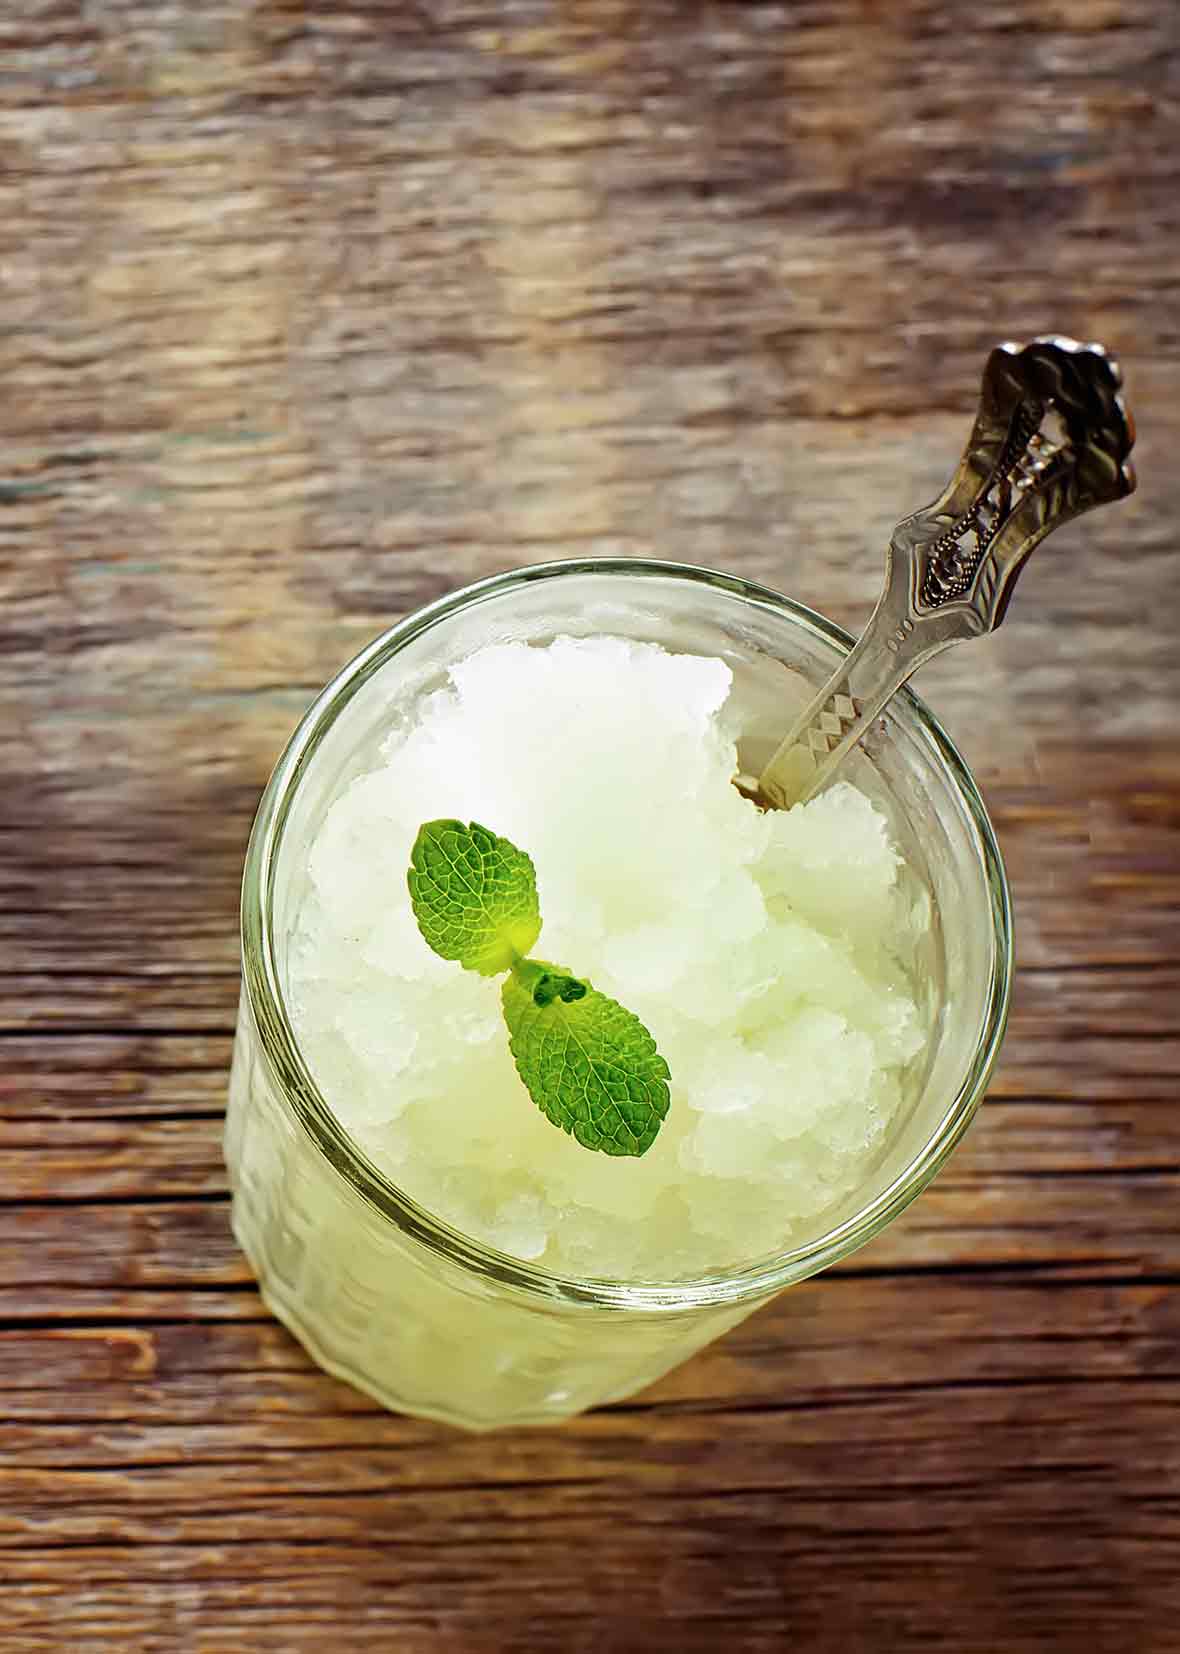 A glass filled with margarita granita, topped with a lime sprig and a spoon resting in the glass.